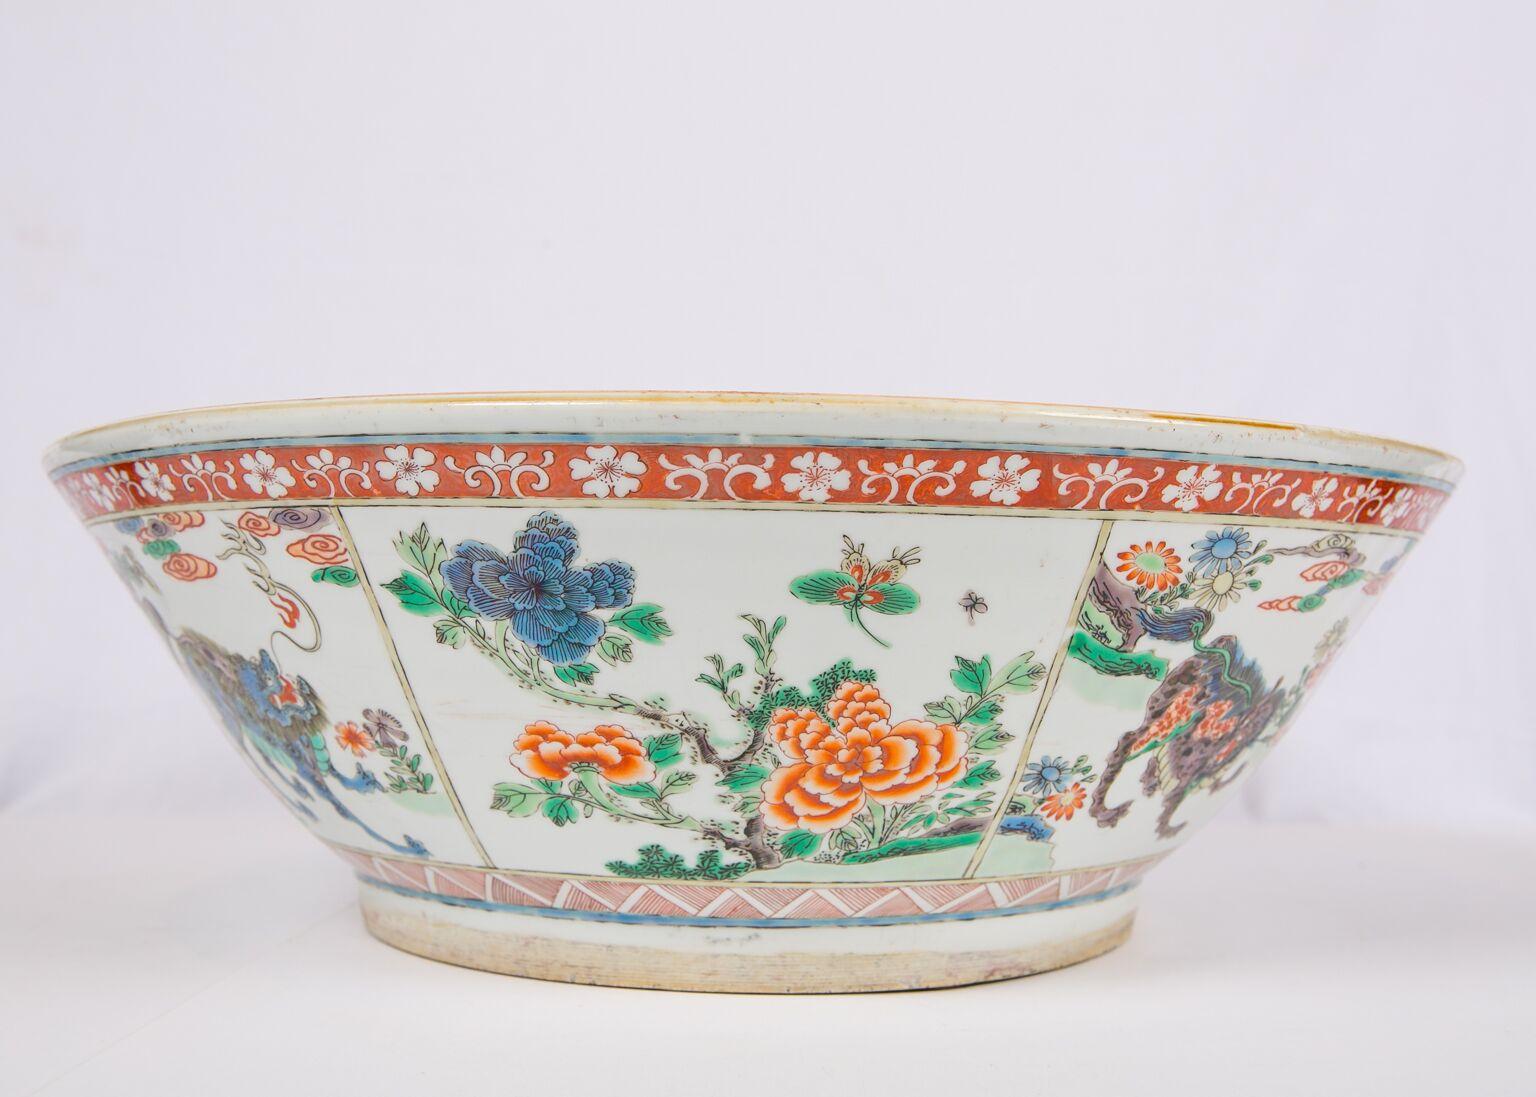 Large Antique Chinese Bowl Decorated in Famille Verte Enamels, Circa 1900 2